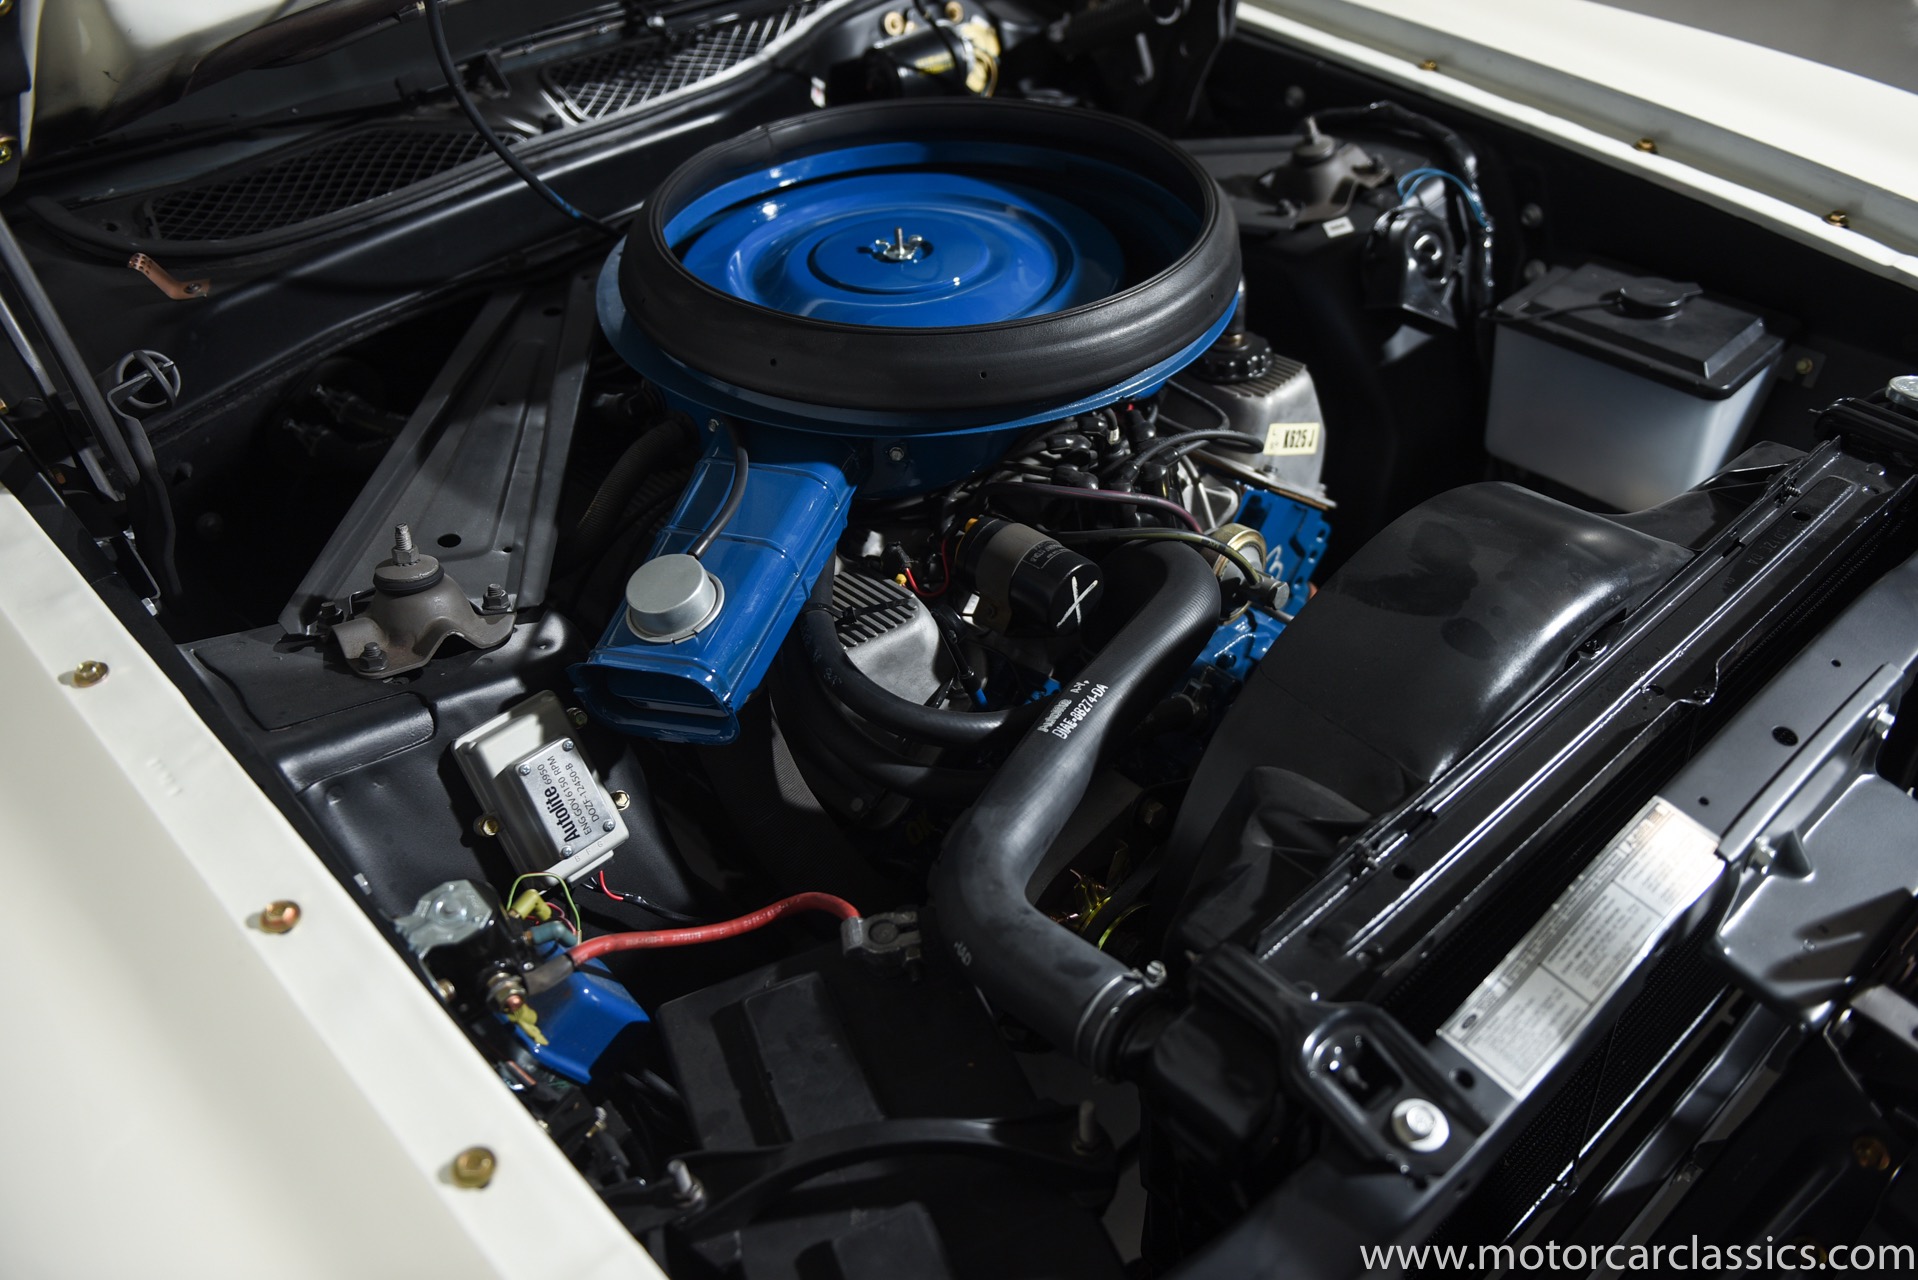 Used 1971 Ford Mustang Boss 351 For Sale ($114,900) | Motorcar Classics ...